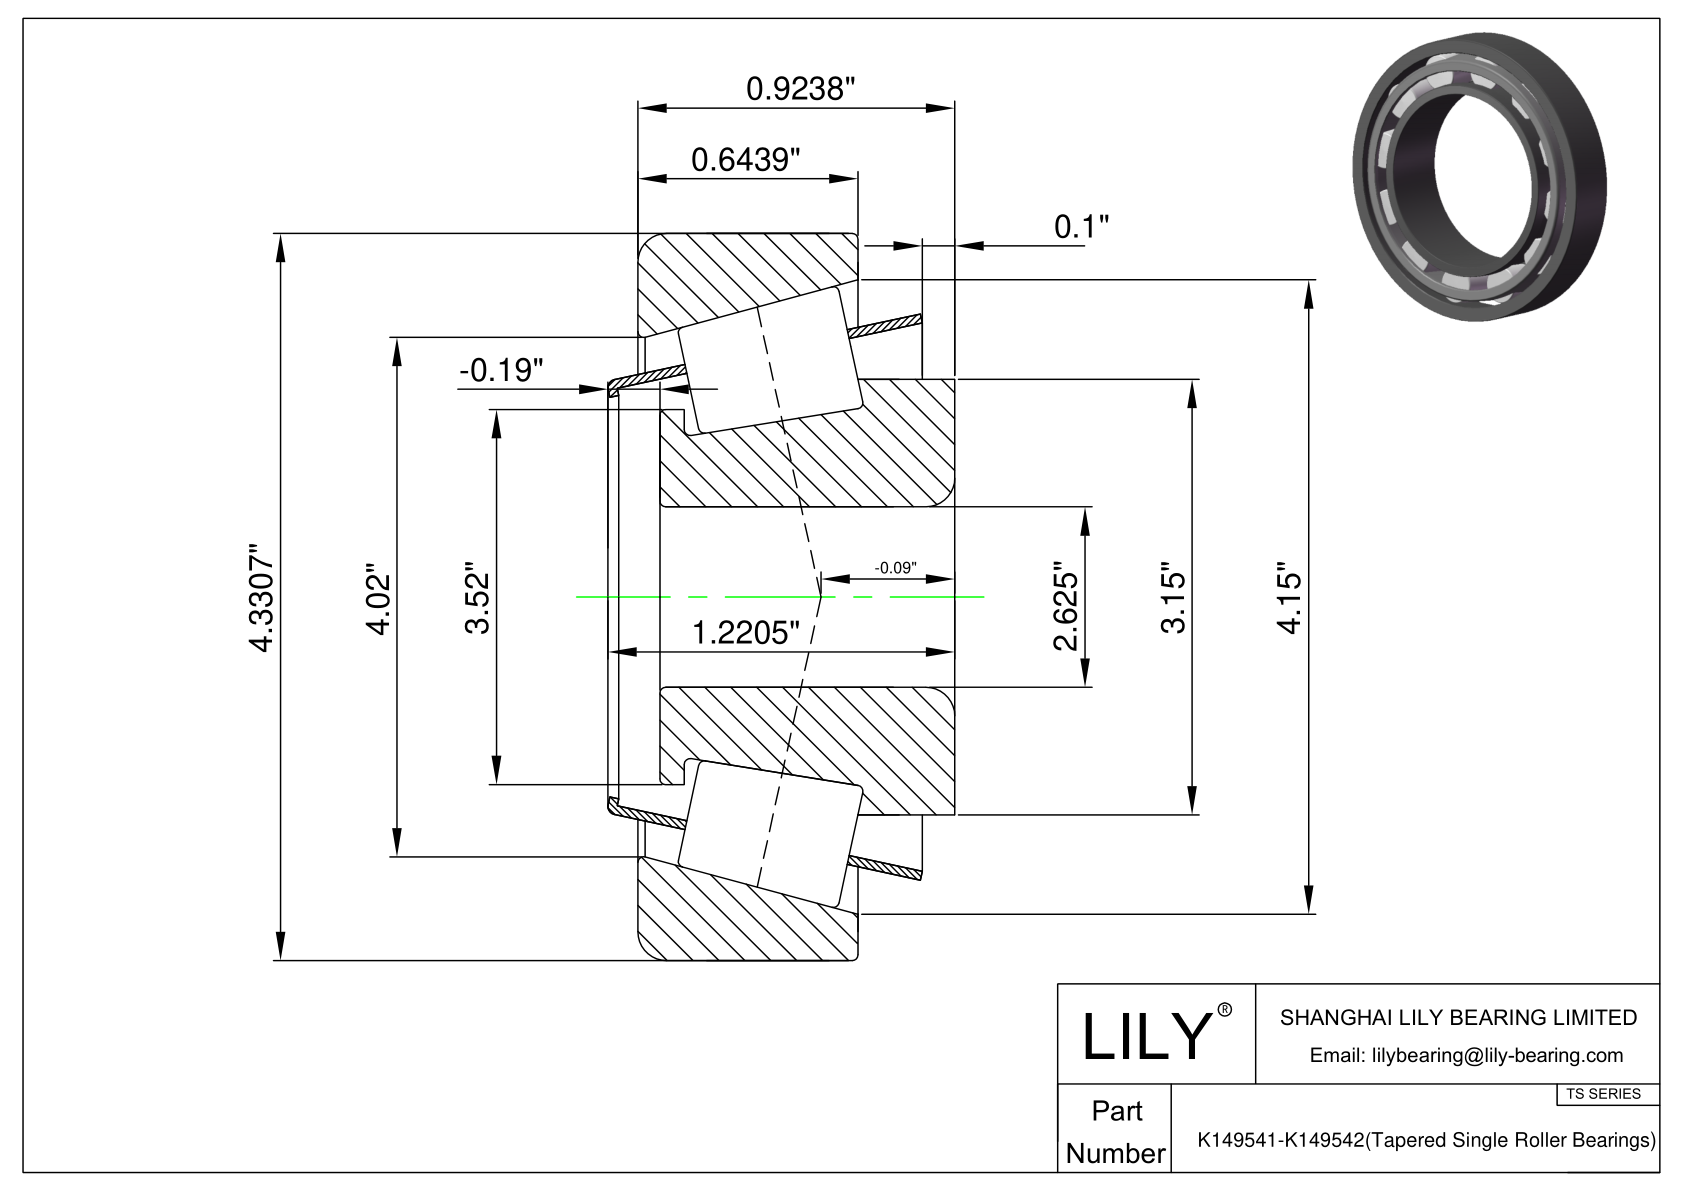 K149541-K149542 TS (Tapered Single Roller Bearings) (Imperial) cad drawing